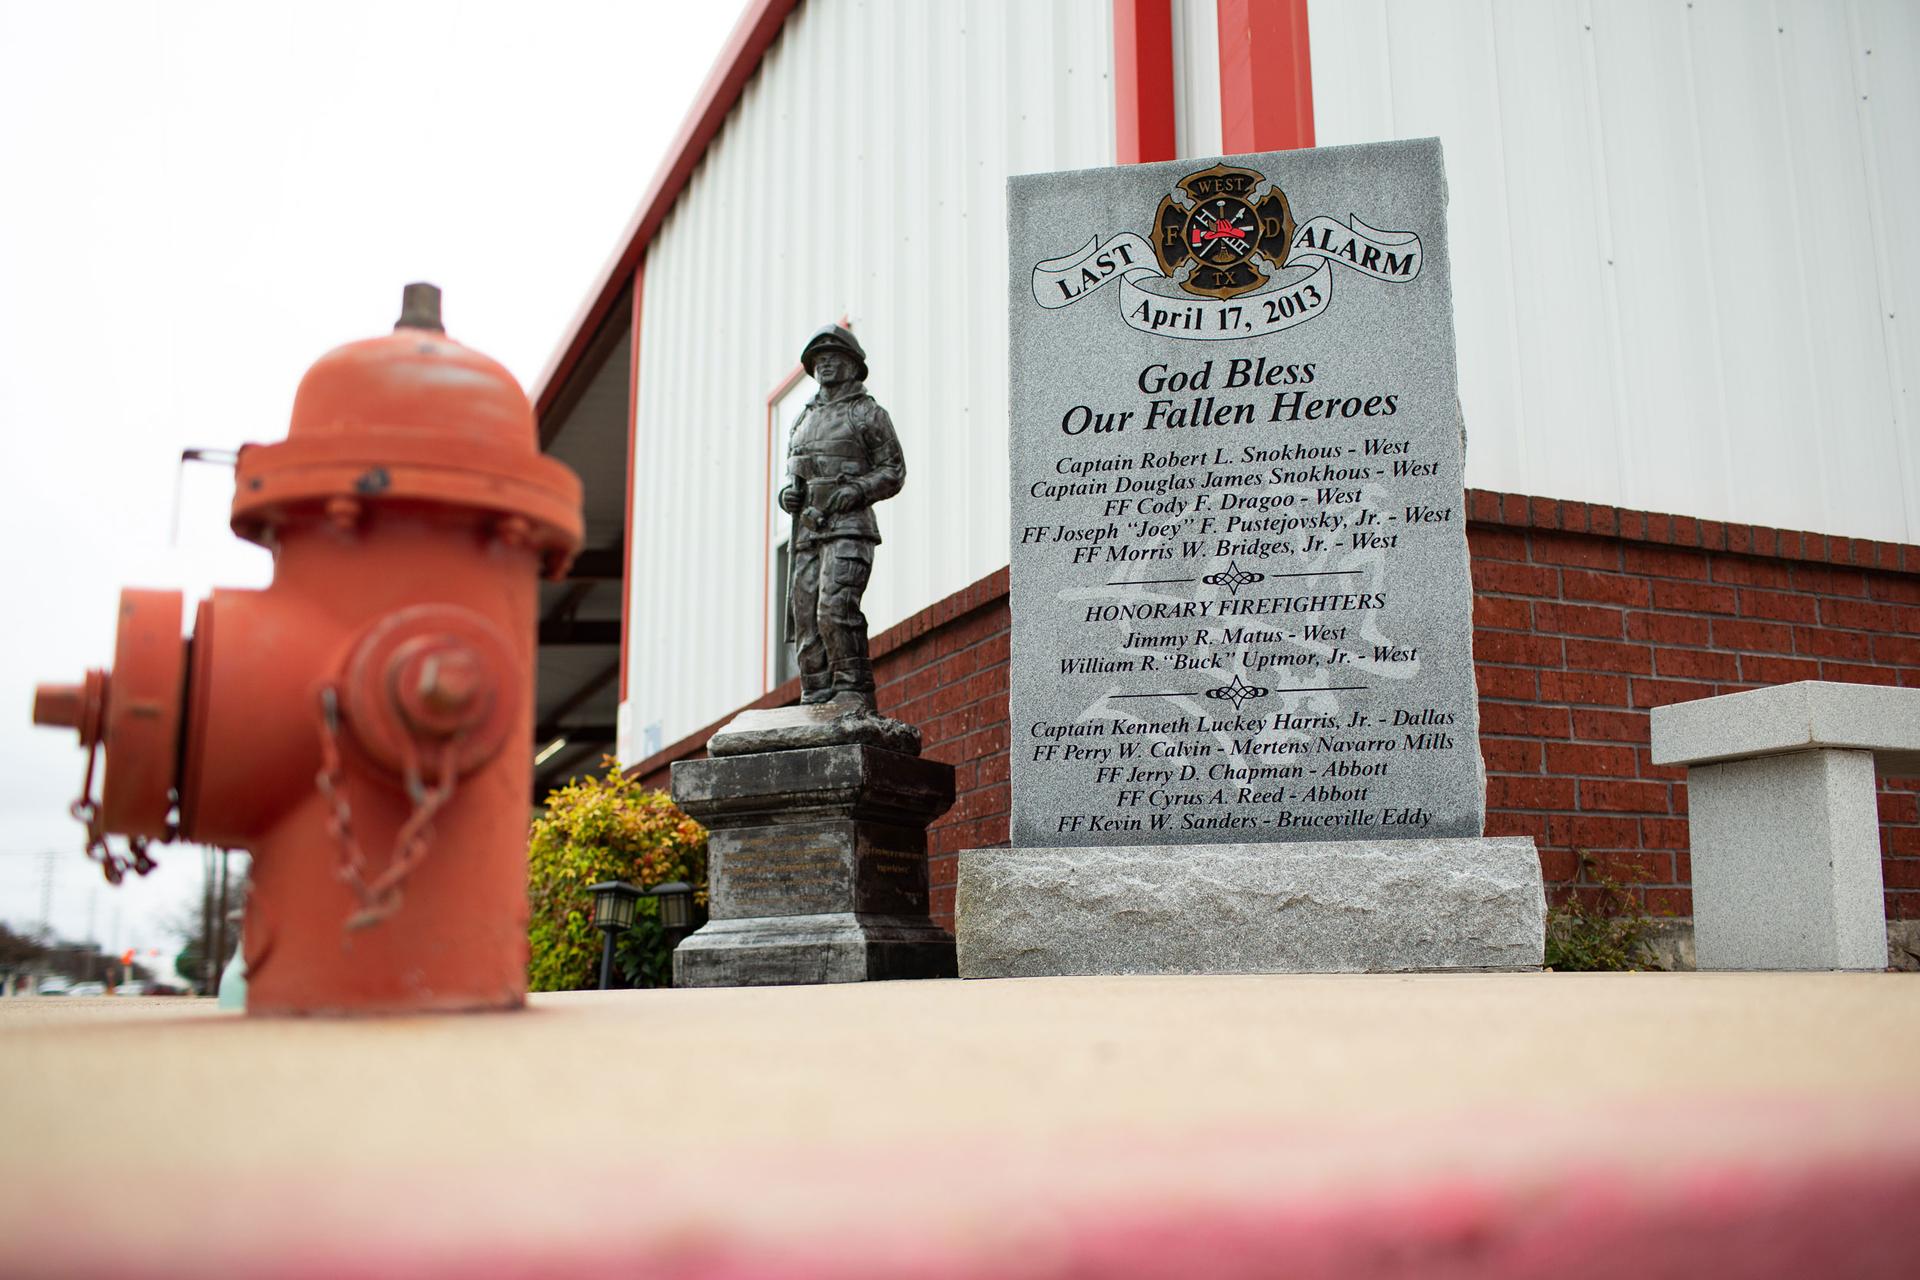 A statue of a fireman is next to a red fire hydrant.